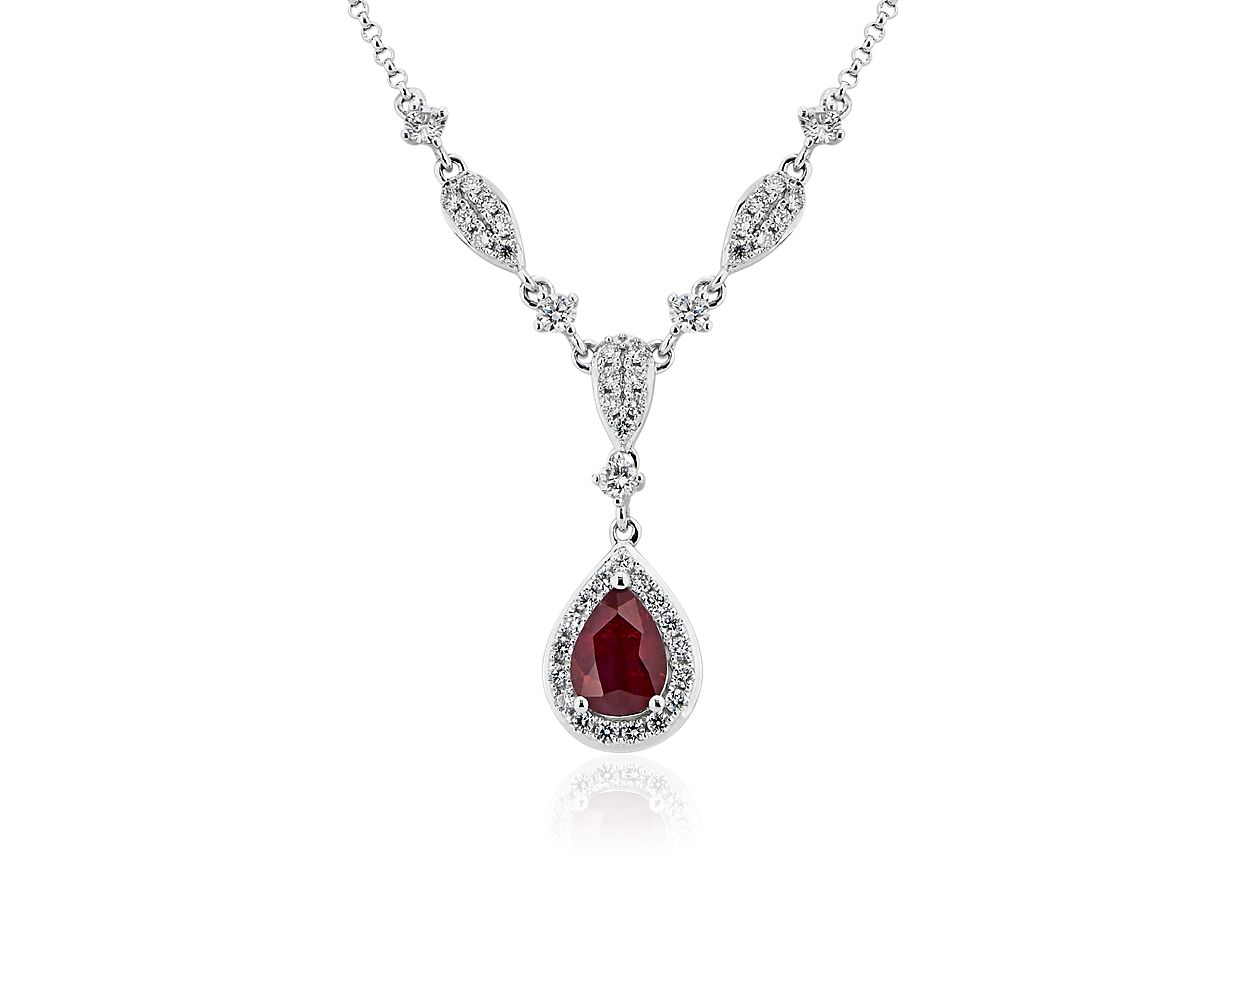 Pear Shape Ruby and Round Diamond Necklace in 14k White Gold (7x5mm)